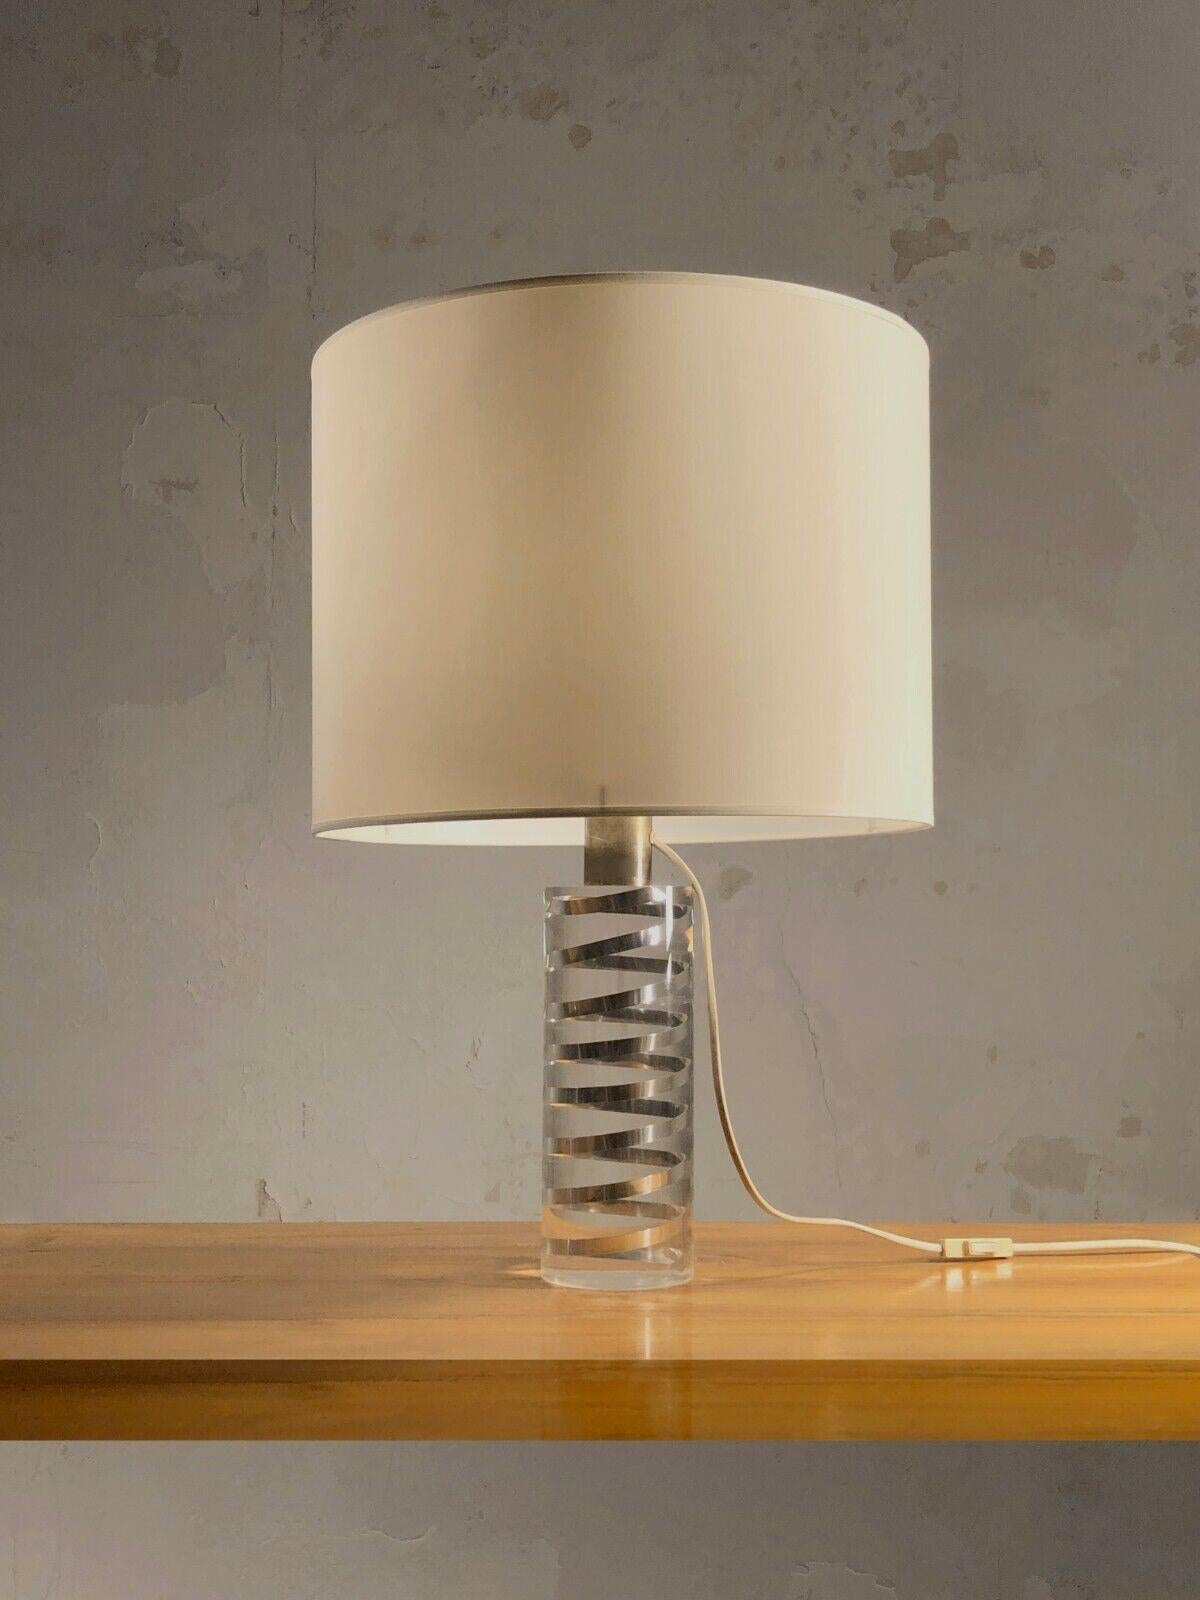 An important cylindrical table lamp, Post-Modernist, Seventies, Kinetic, Shabby-Chic, Pop, solid cylinder in transparent plexiglass including a metal spiral, attributed to Pierre Giraudon, France 1970.

SOLD WITH OR WITHOUT LAMPSHADES.
A SALE